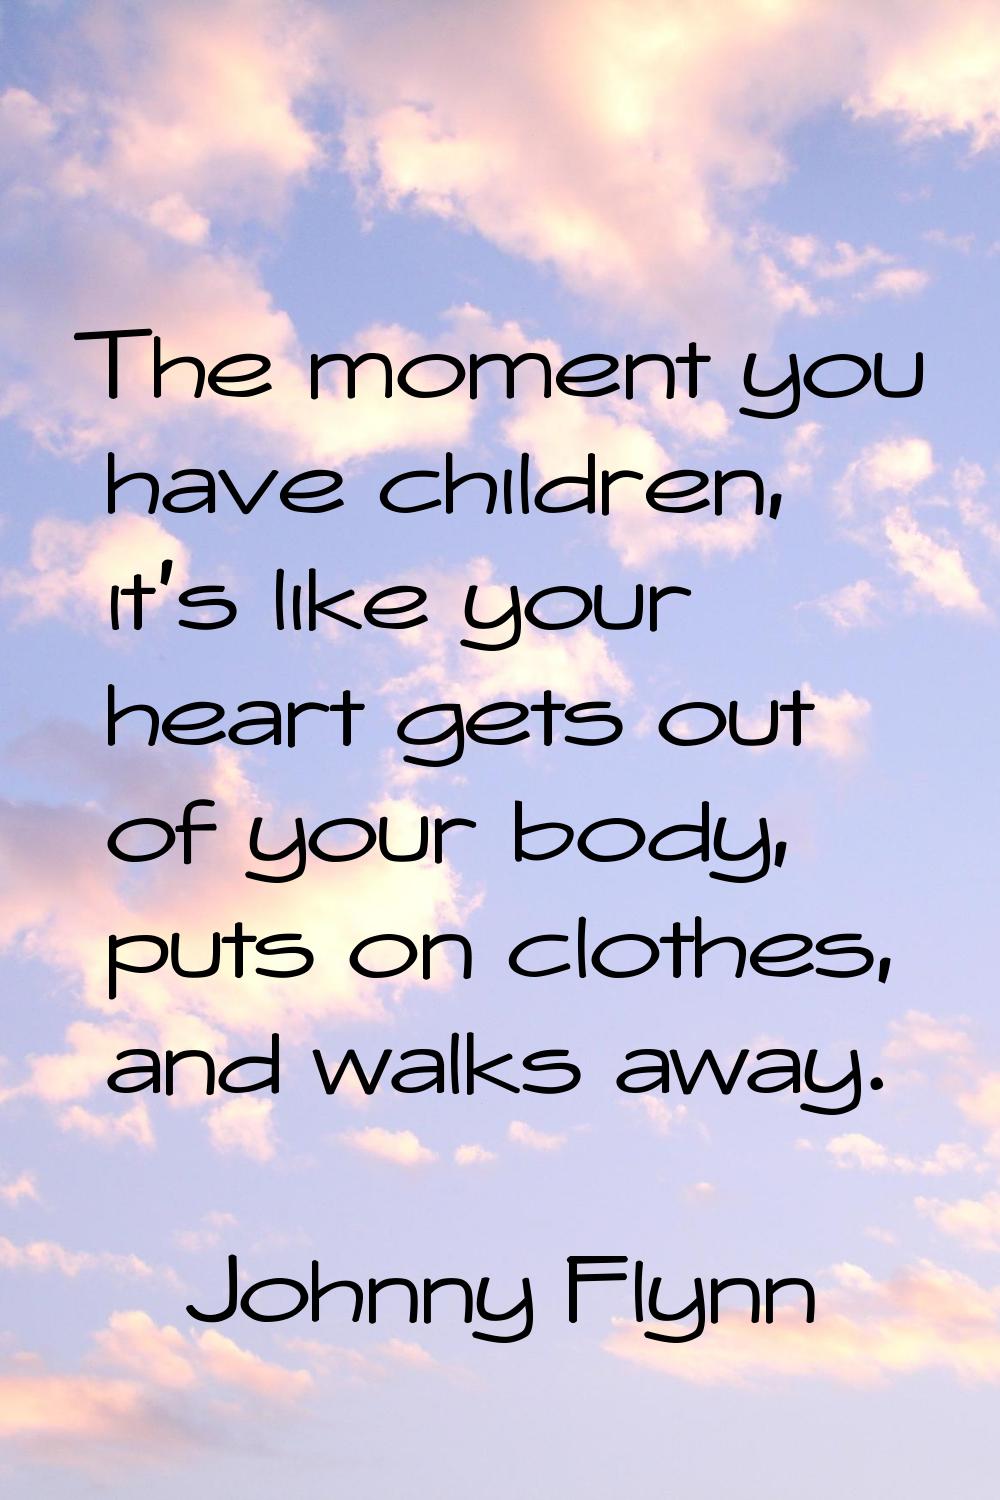 The moment you have children, it's like your heart gets out of your body, puts on clothes, and walk